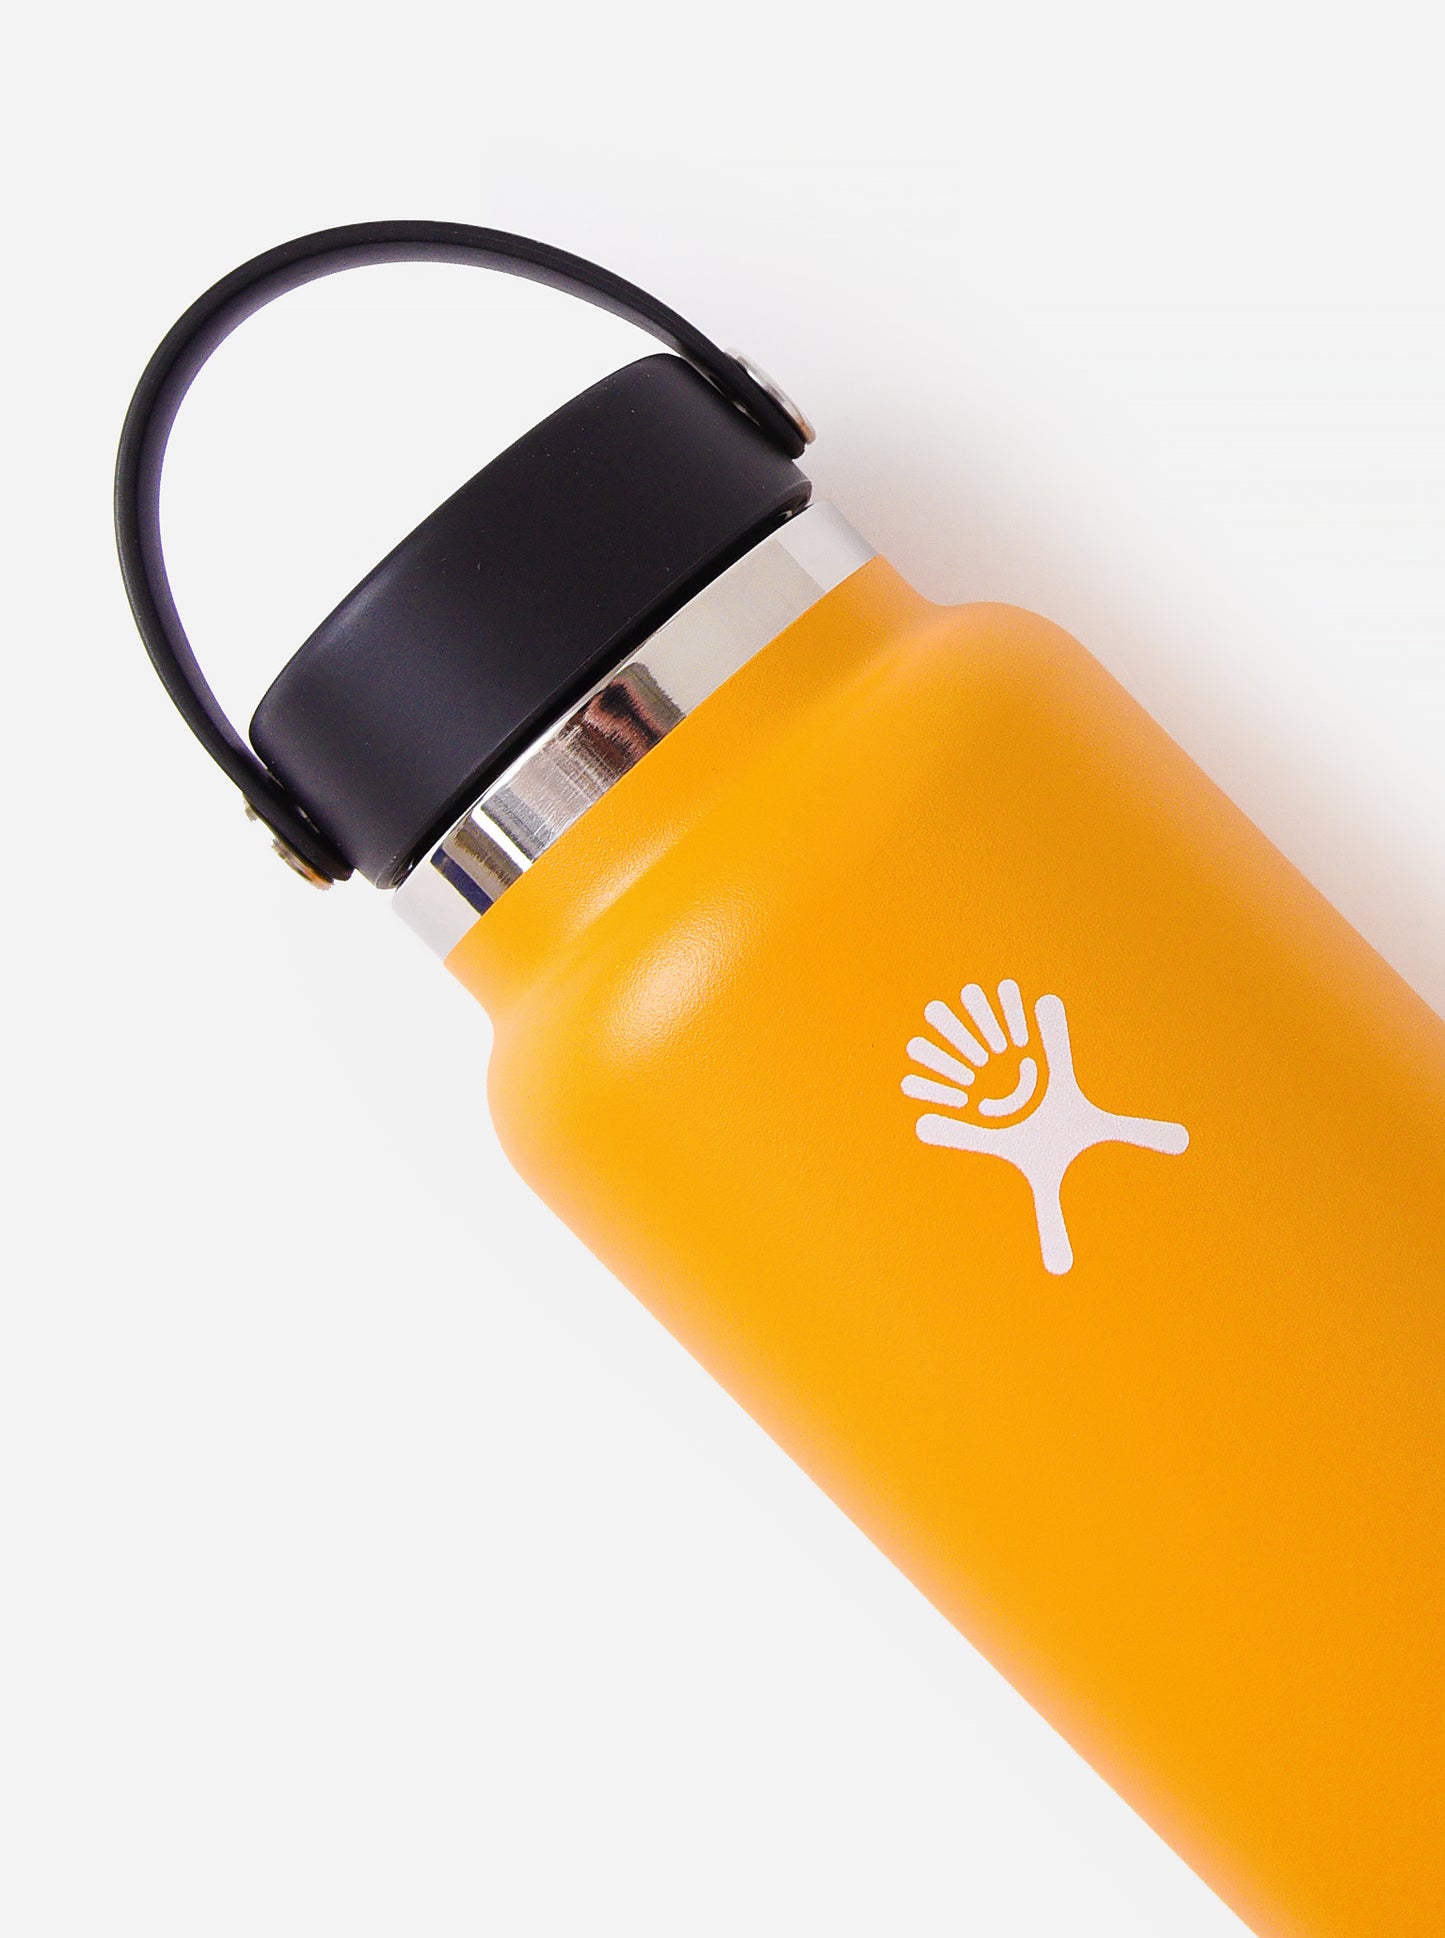 Hydroflask Wide Mouth 32oz Water Bottle